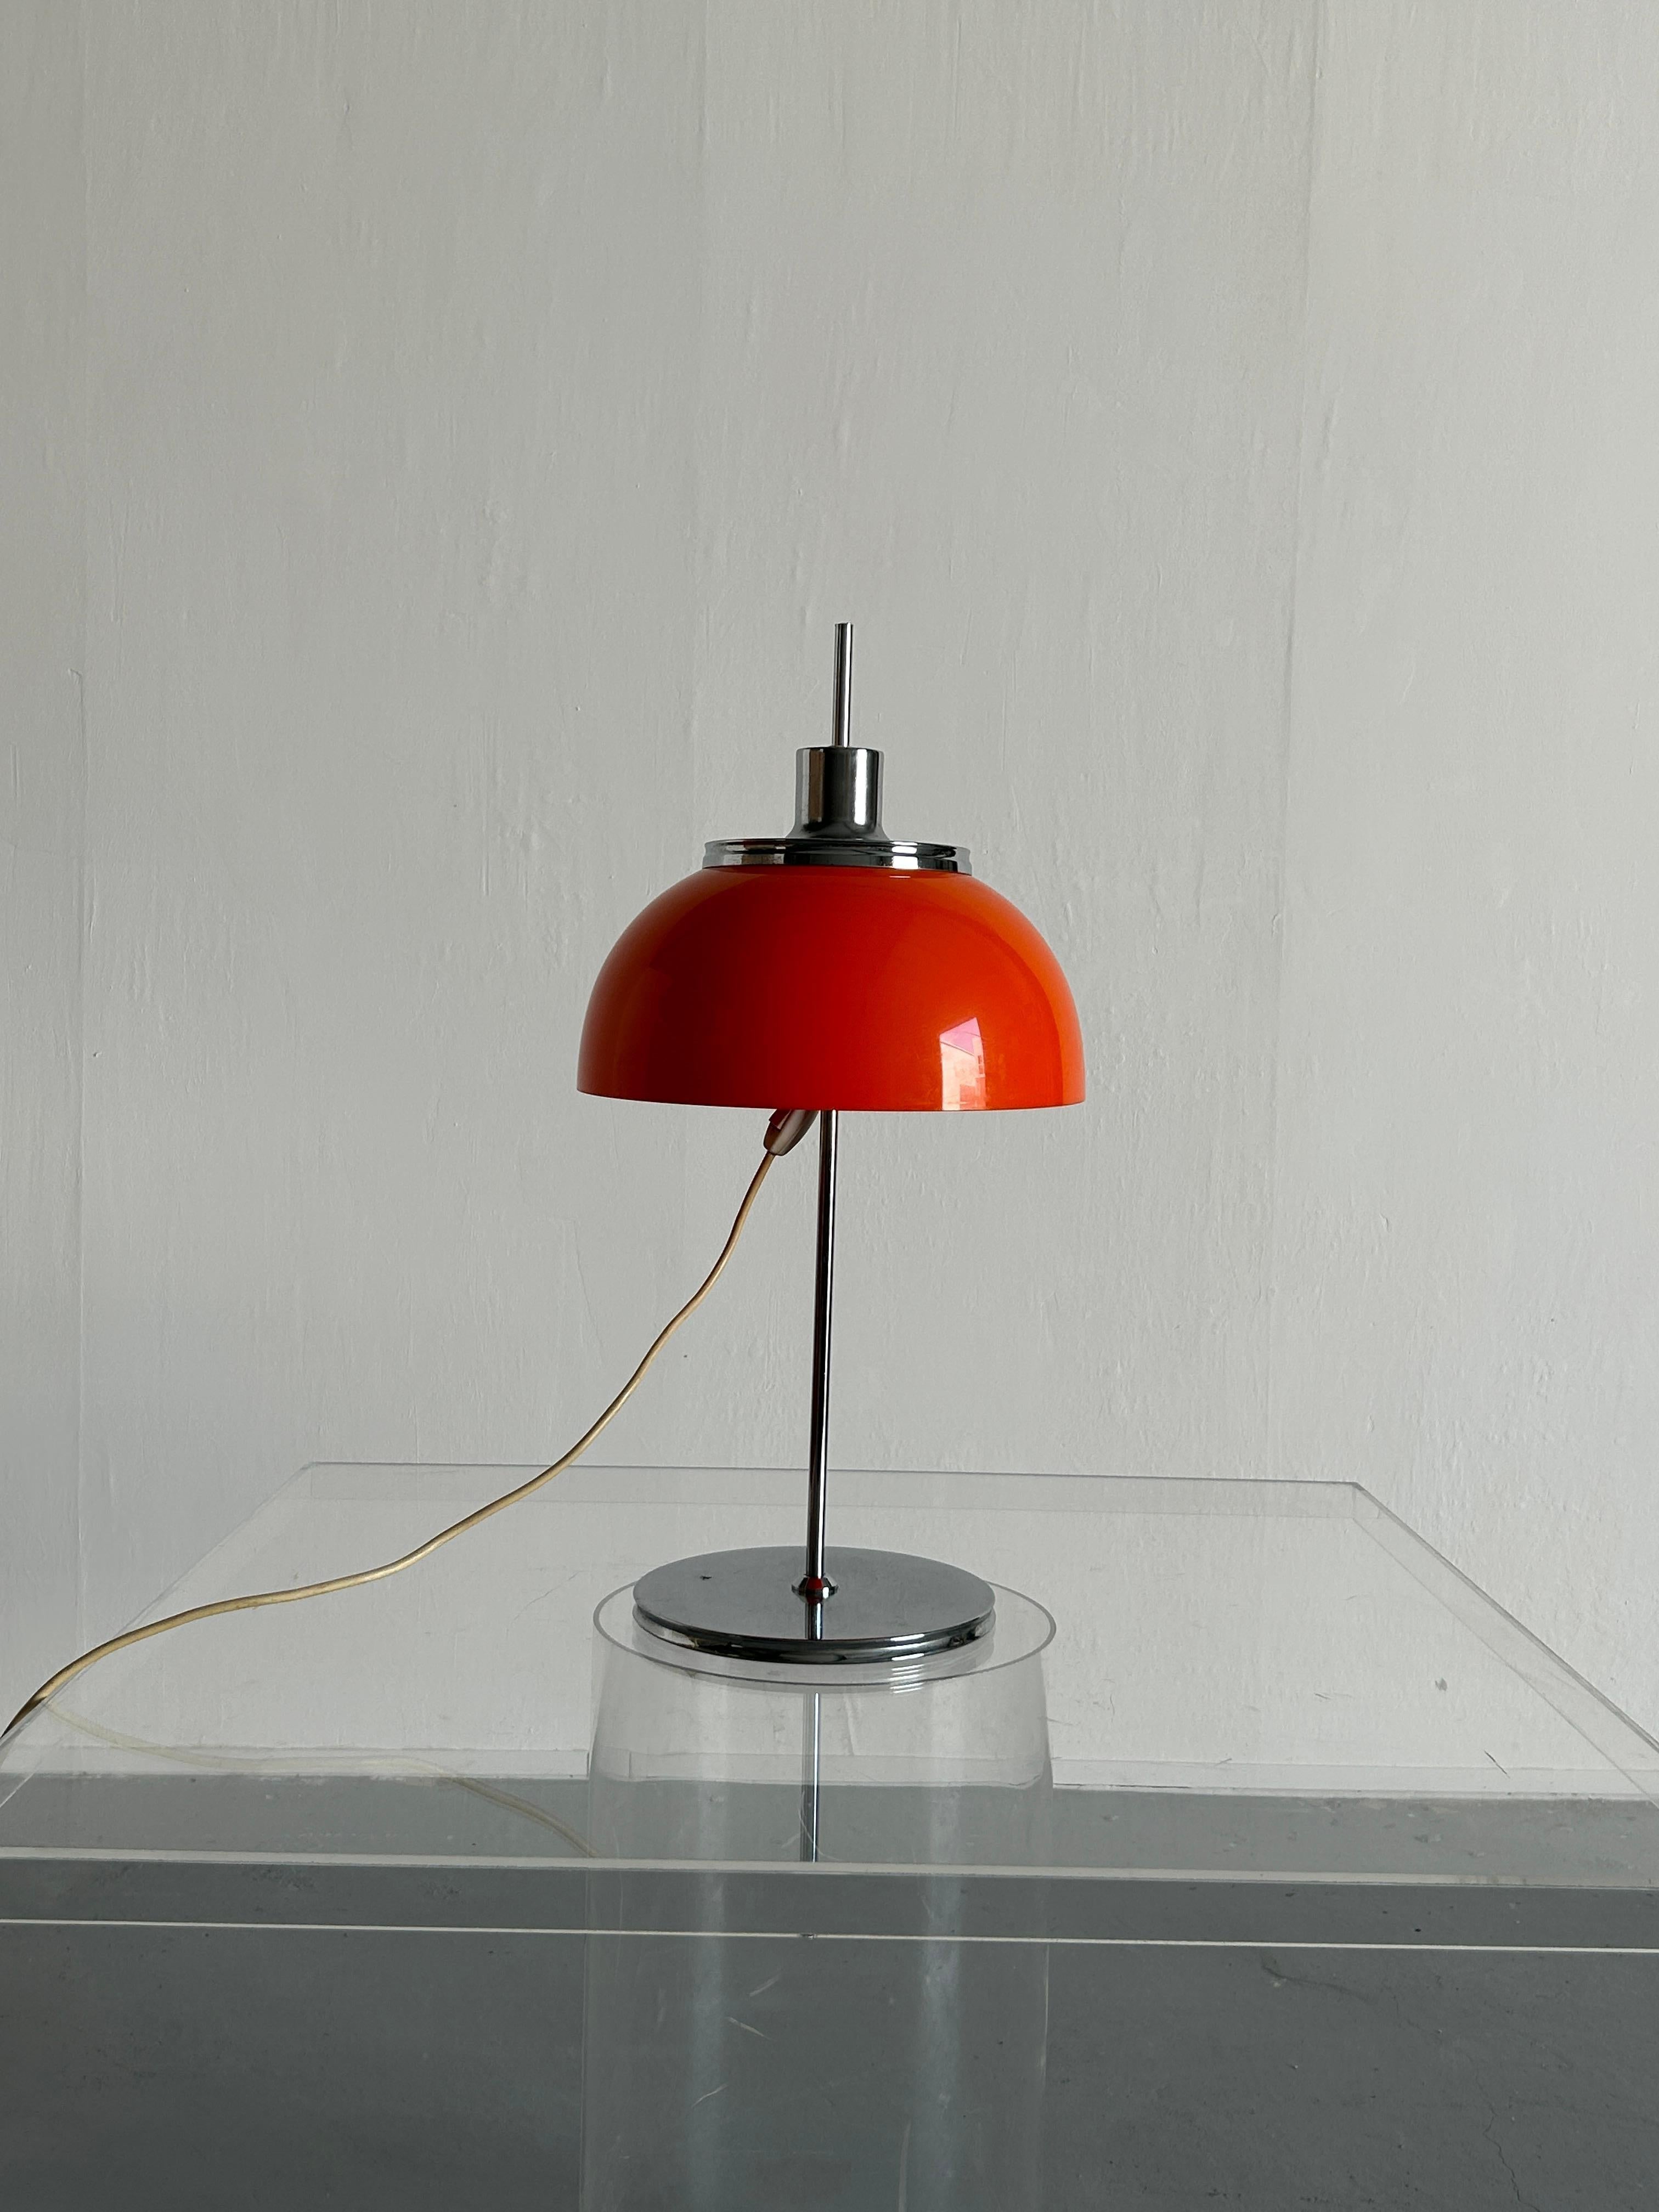 A beautiful orange Mid-Century-Modern table lamp produced by Meblo for Harvey Guzzini Studio throughout the 1960s-1970s. Model 'Faro'. Made from chromed metal and plastic. Can be adjusted to any height with one screw. 

In original vintage